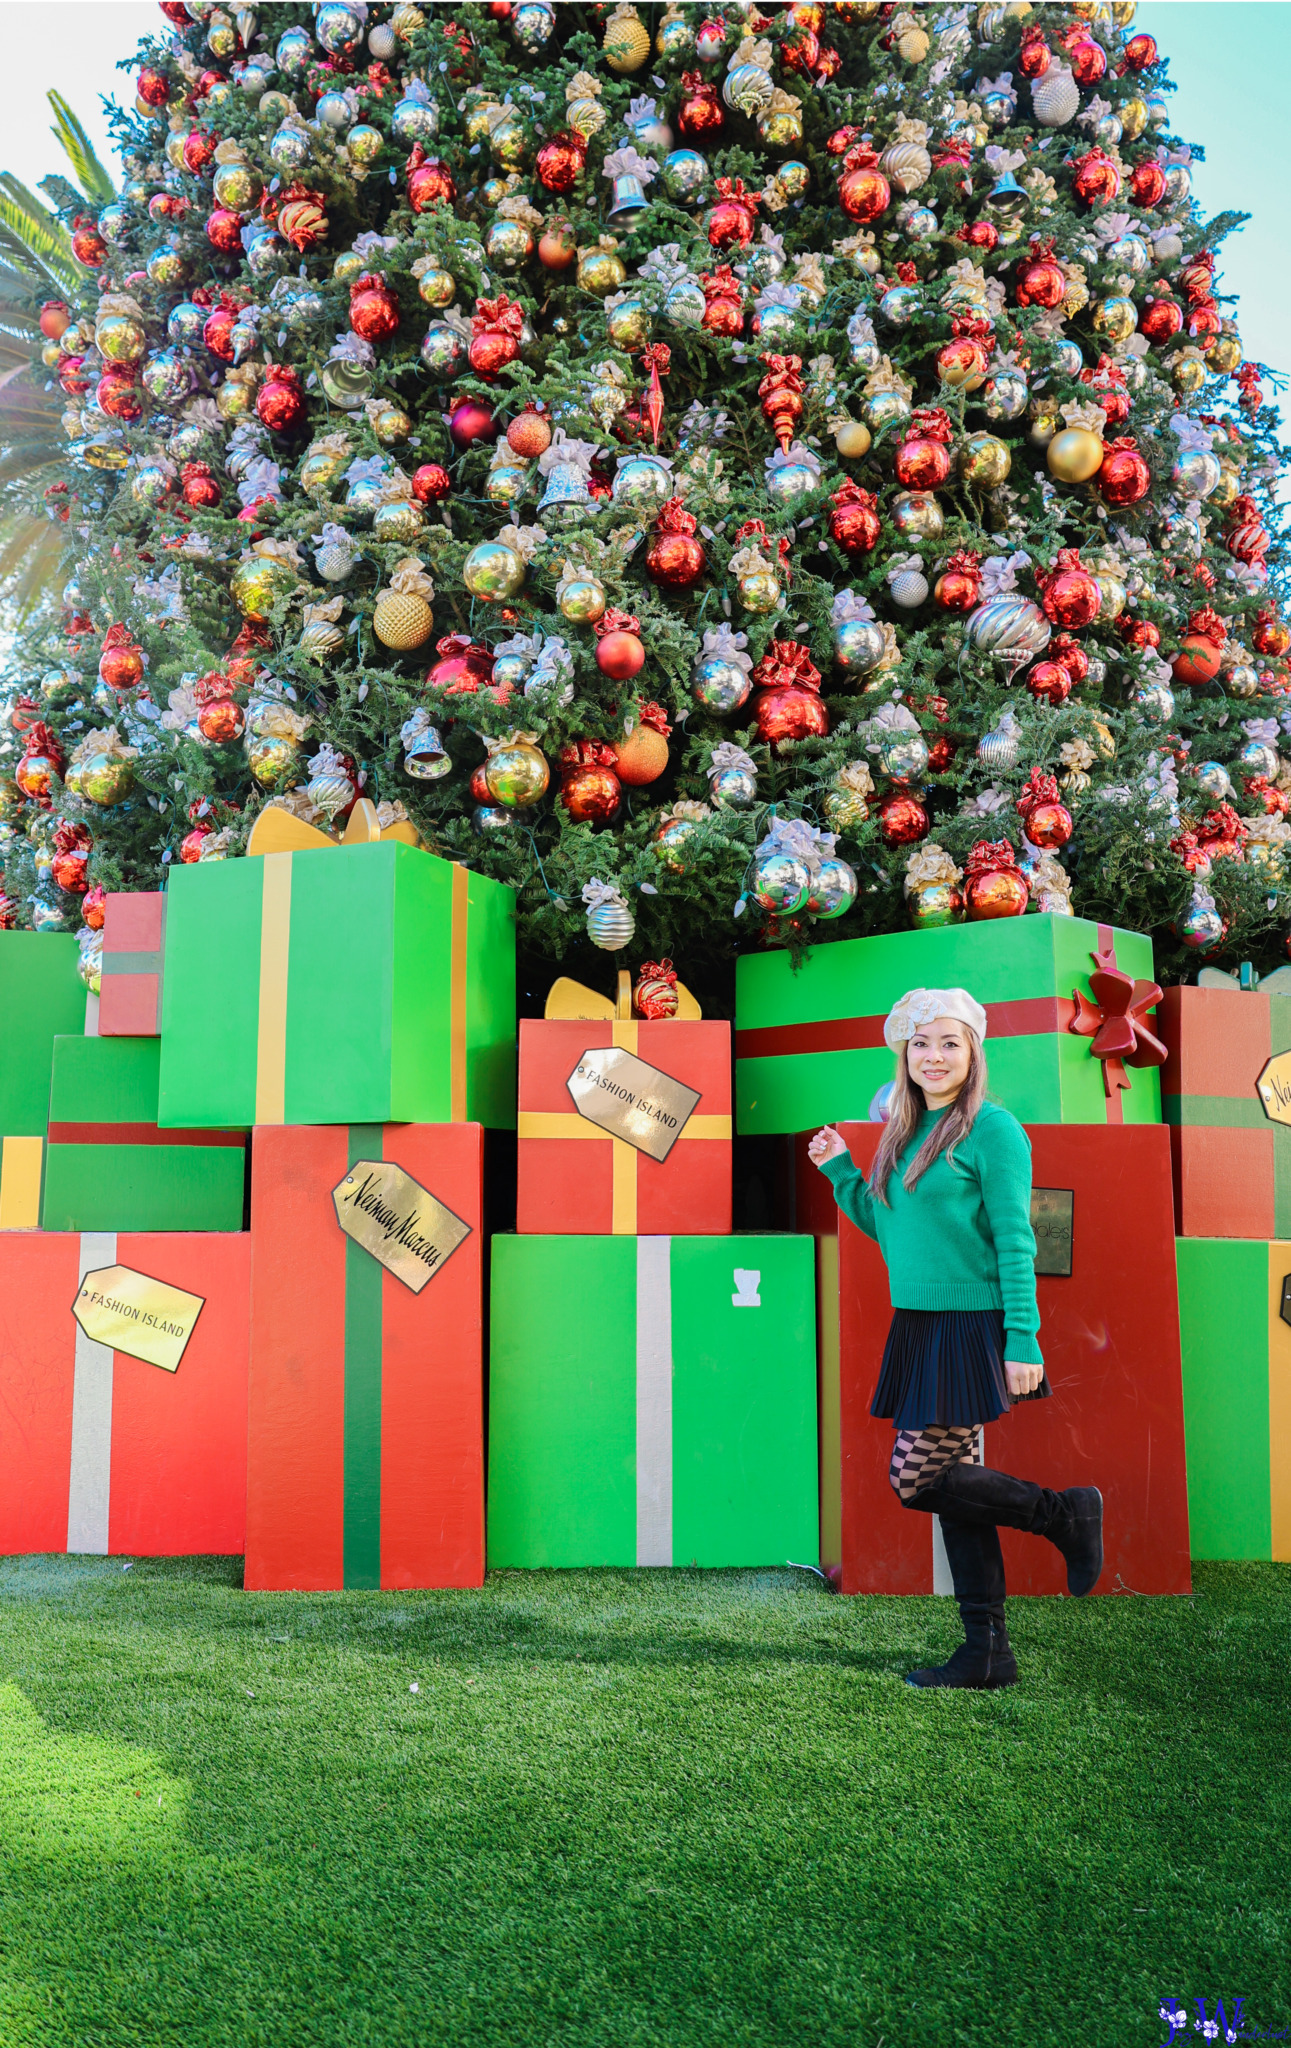 Christmas displays at Fashion Island in Southern California. Photography by Jaz Wanderlust.